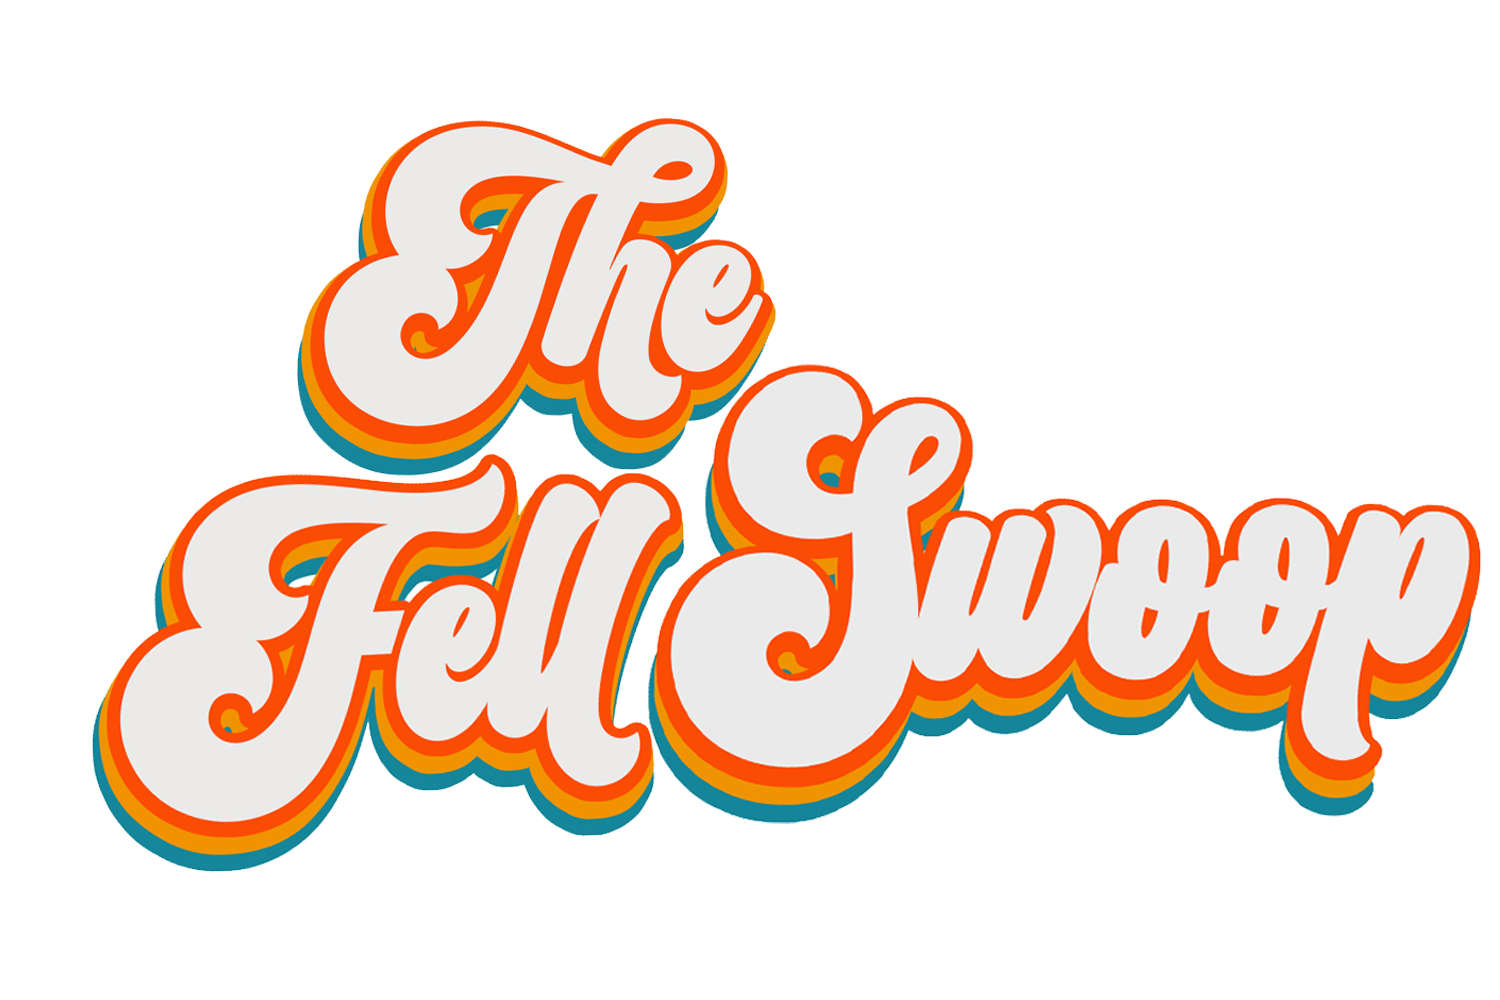 The Fell Swoop